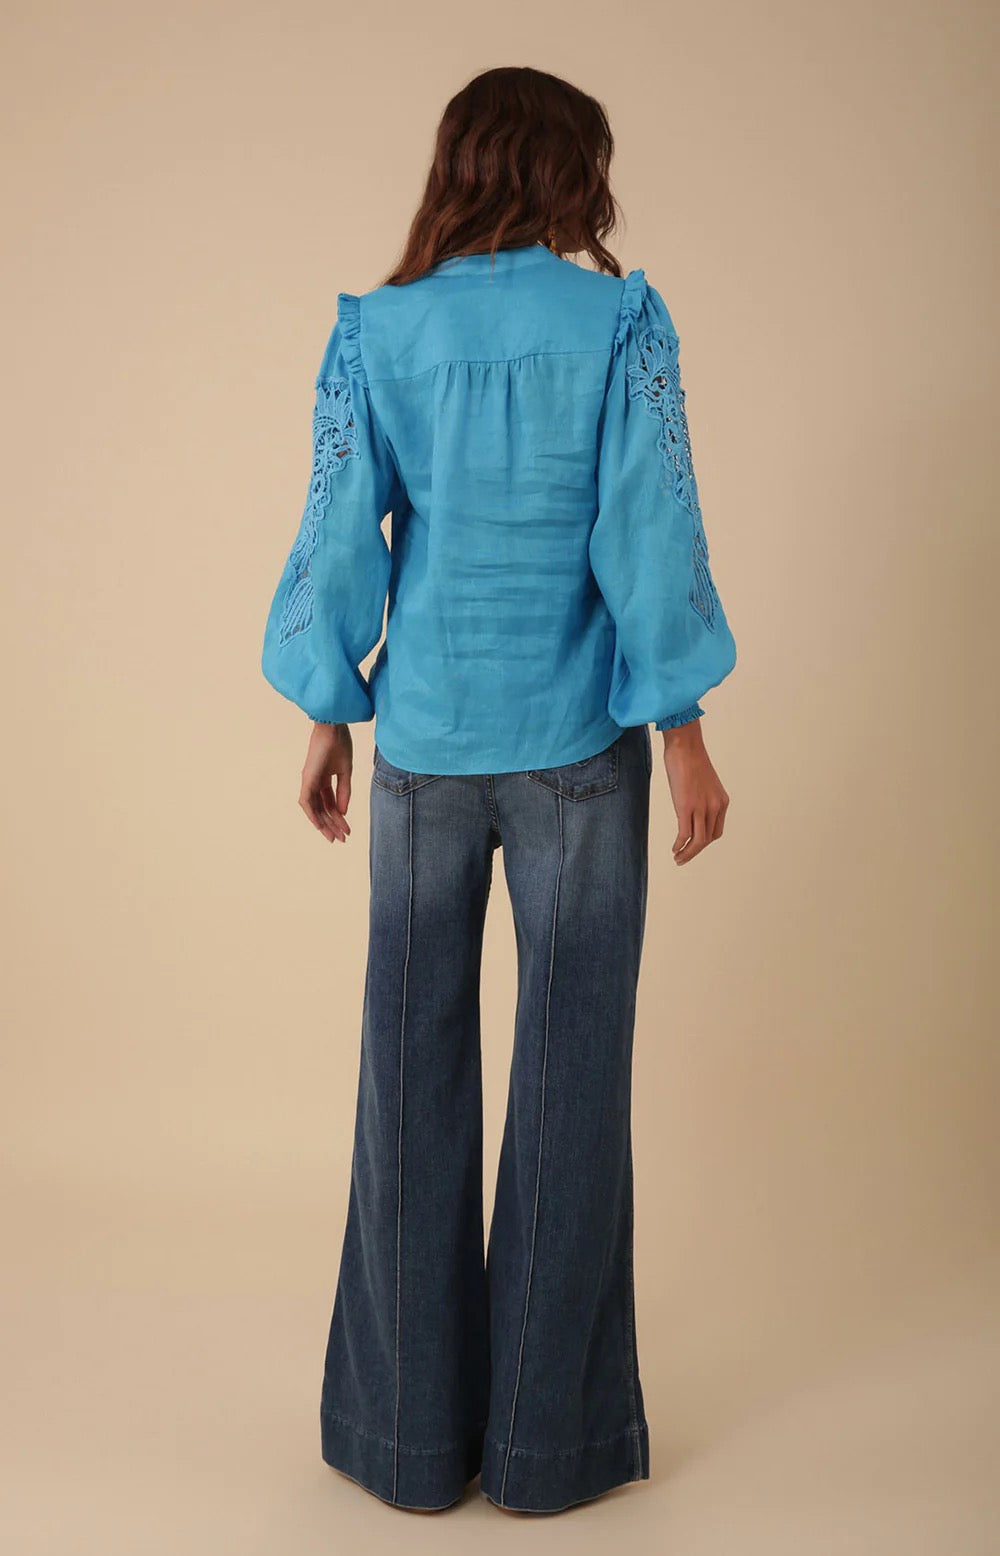 Turquoise Reese Linen Lace Blouse